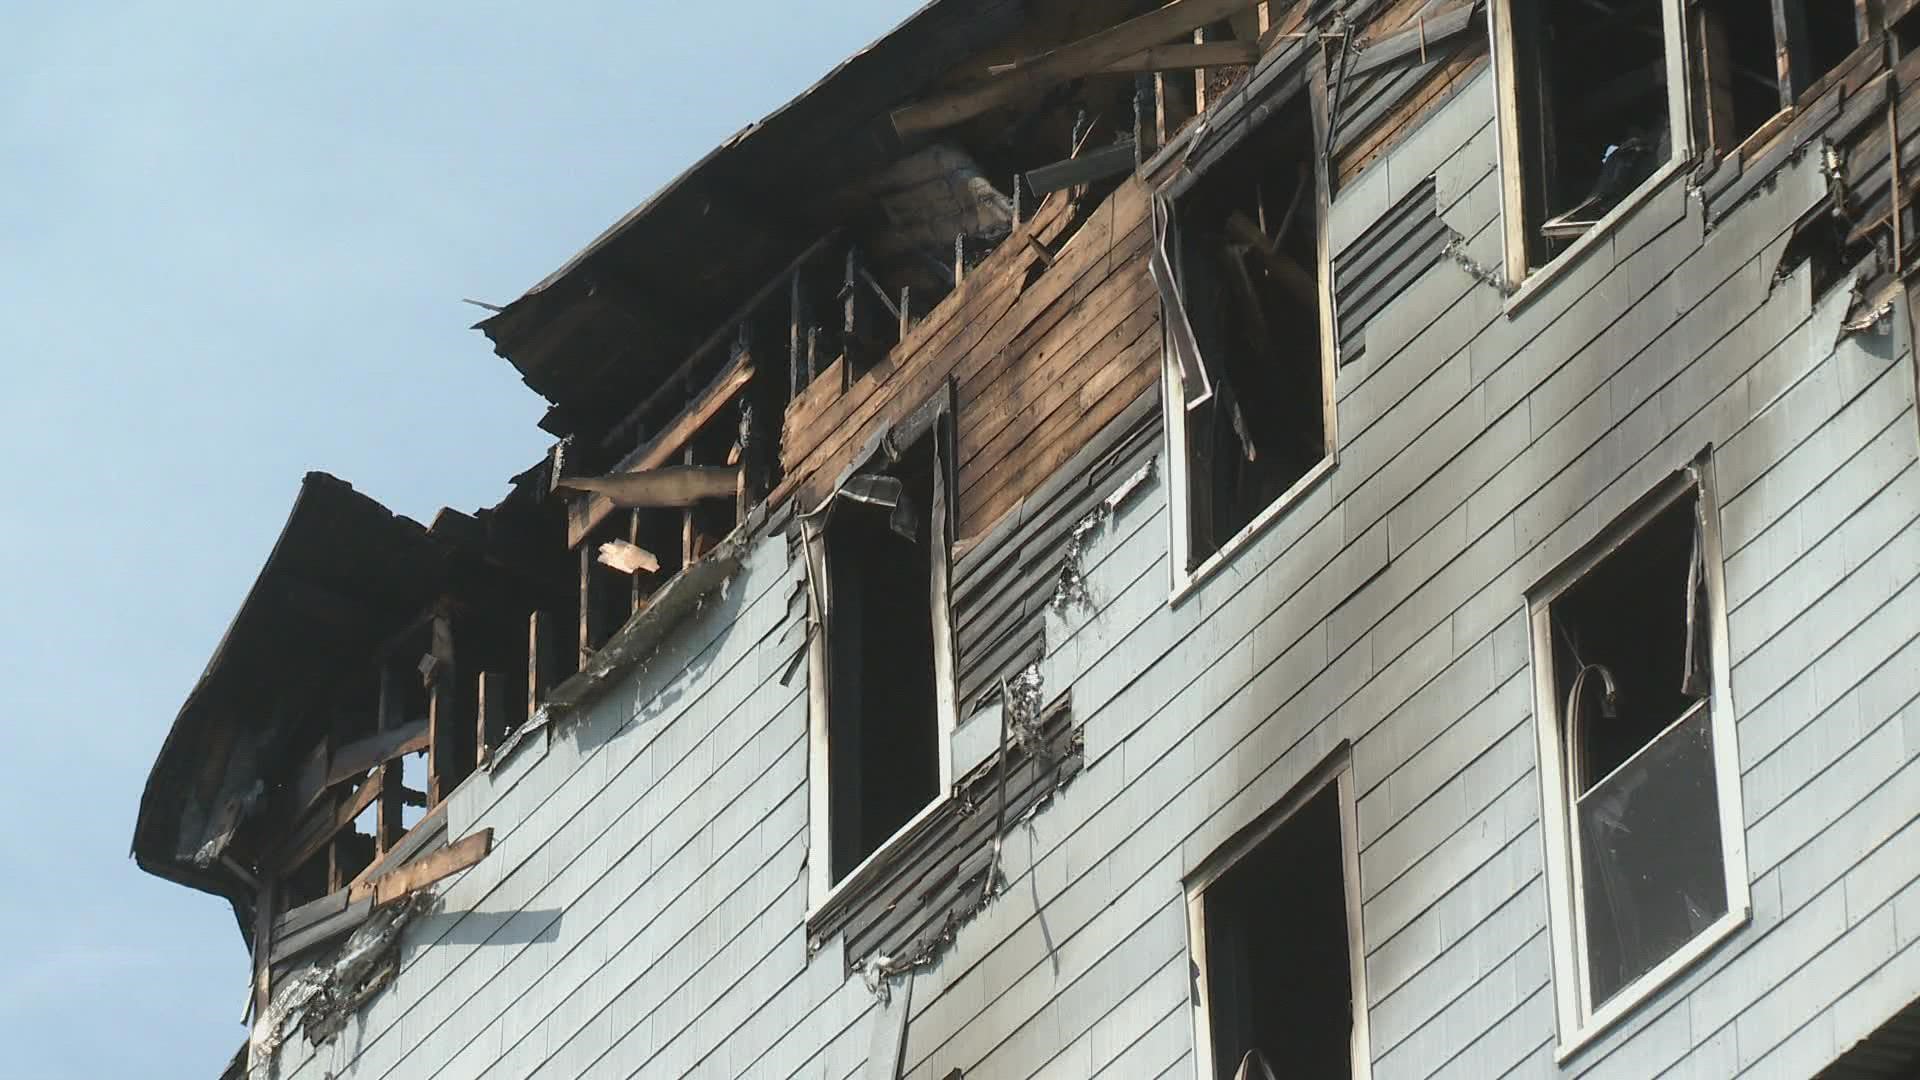 A fire in Lewiston has claimed one life and displaced dozens of families